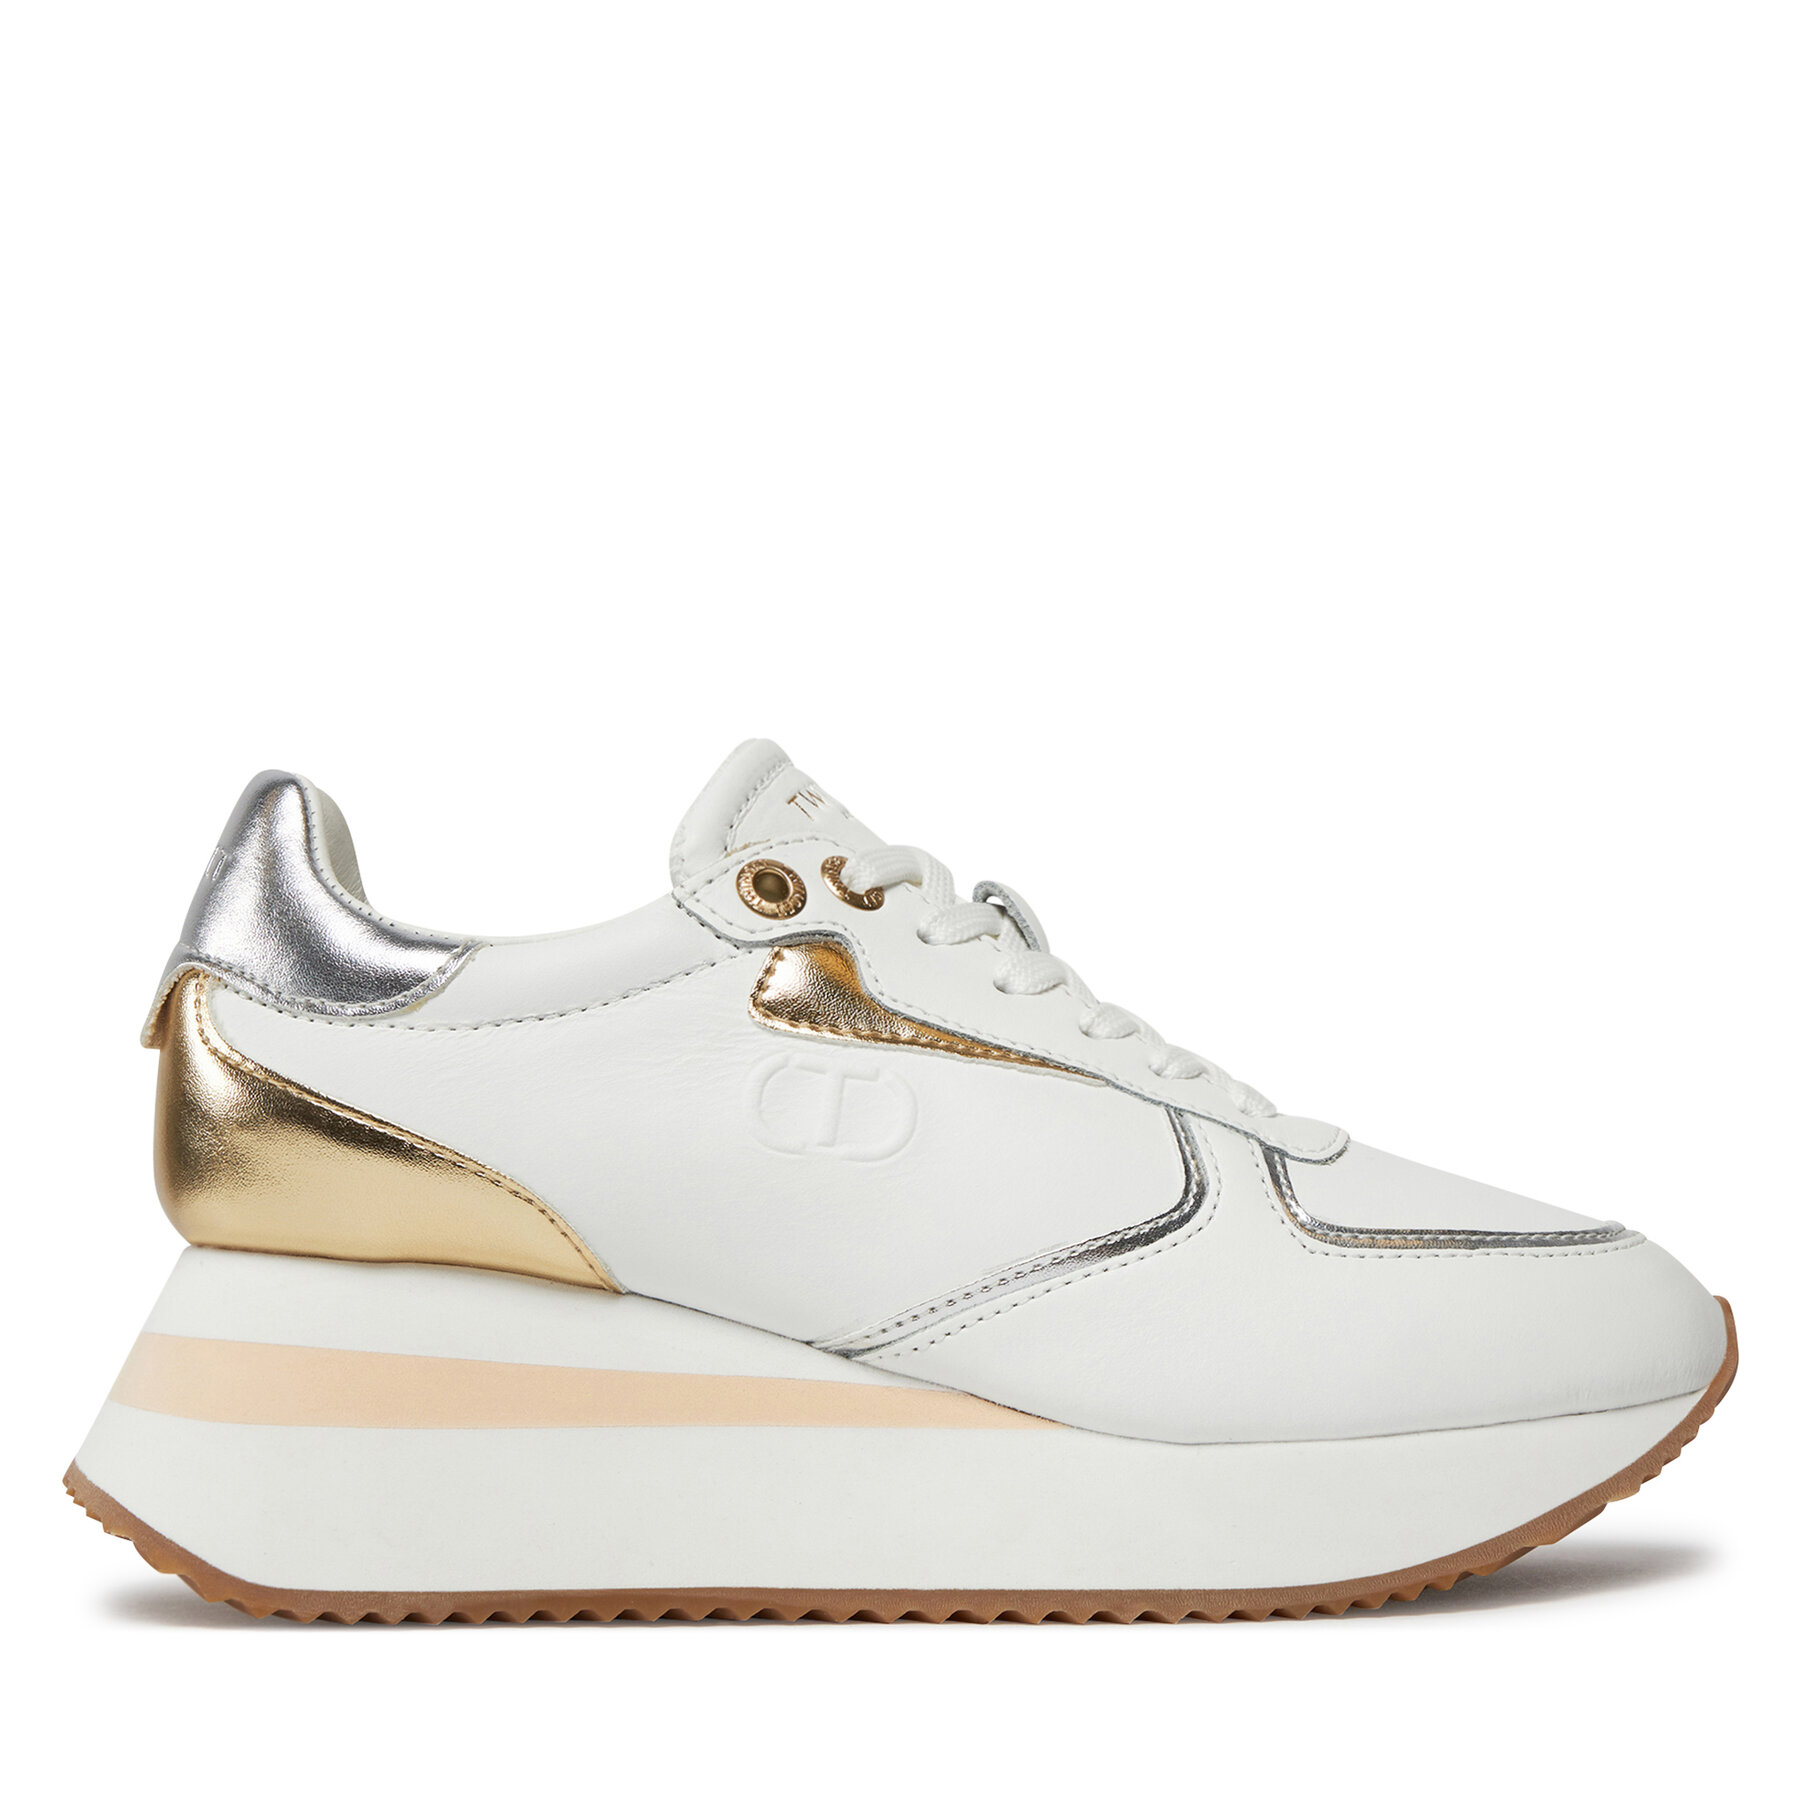 Sneakers TWINSET 241TCP080 Bianco Ottico/Gold/Silver 11339 von TWINSET